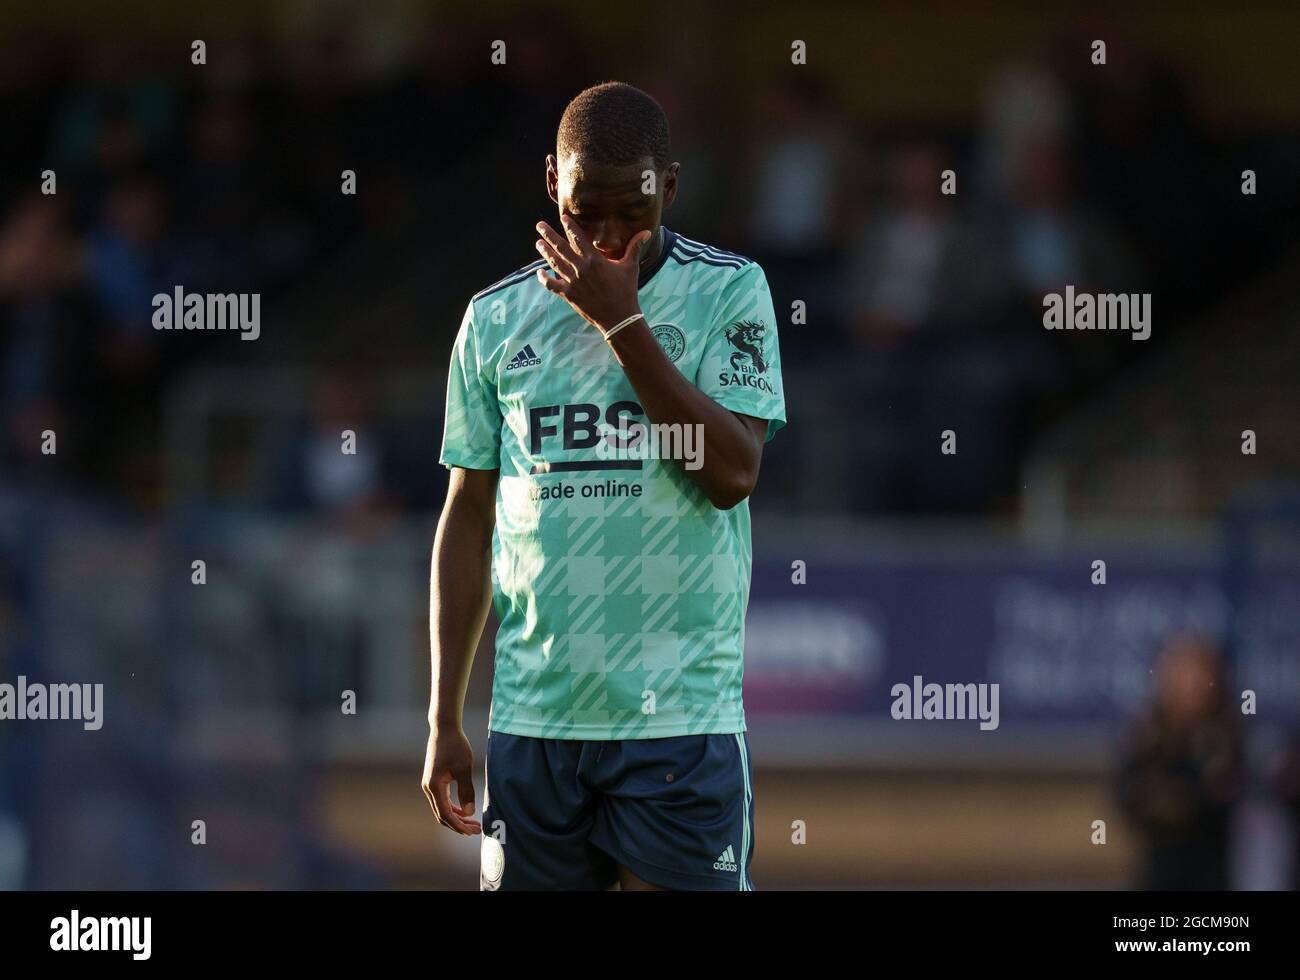 High Wycombe, UK. 28th July, 2021. Boubakary Soumare of Leicester City during the 2021/22 Pre Season Friendly match between Wycombe Wanderers and Leicester City at Adams Park, High Wycombe, England on 28 July 2021. Photo by Andy Rowland. Credit: PRiME Media Images/Alamy Live News Stock Photo